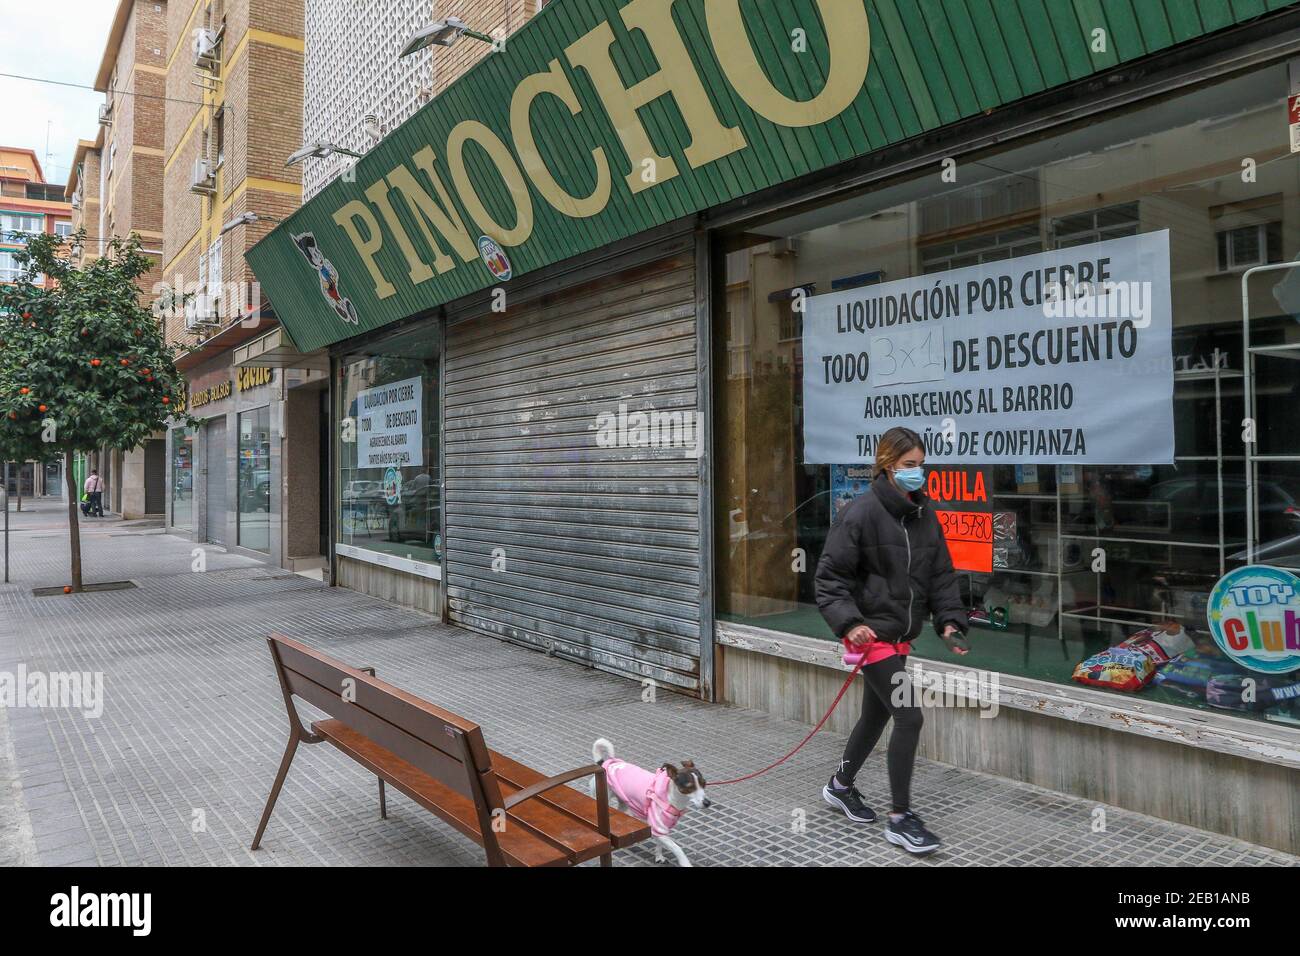 February 11, 2021 (Malaga) It does not stop increasing the number of companies, businesses, driving schools, Shops that put the settlement cartel for closure due to the health crisis of the Covid19 or coronavirus Credit: CORDON PRESS/Alamy Live News Stock Photo